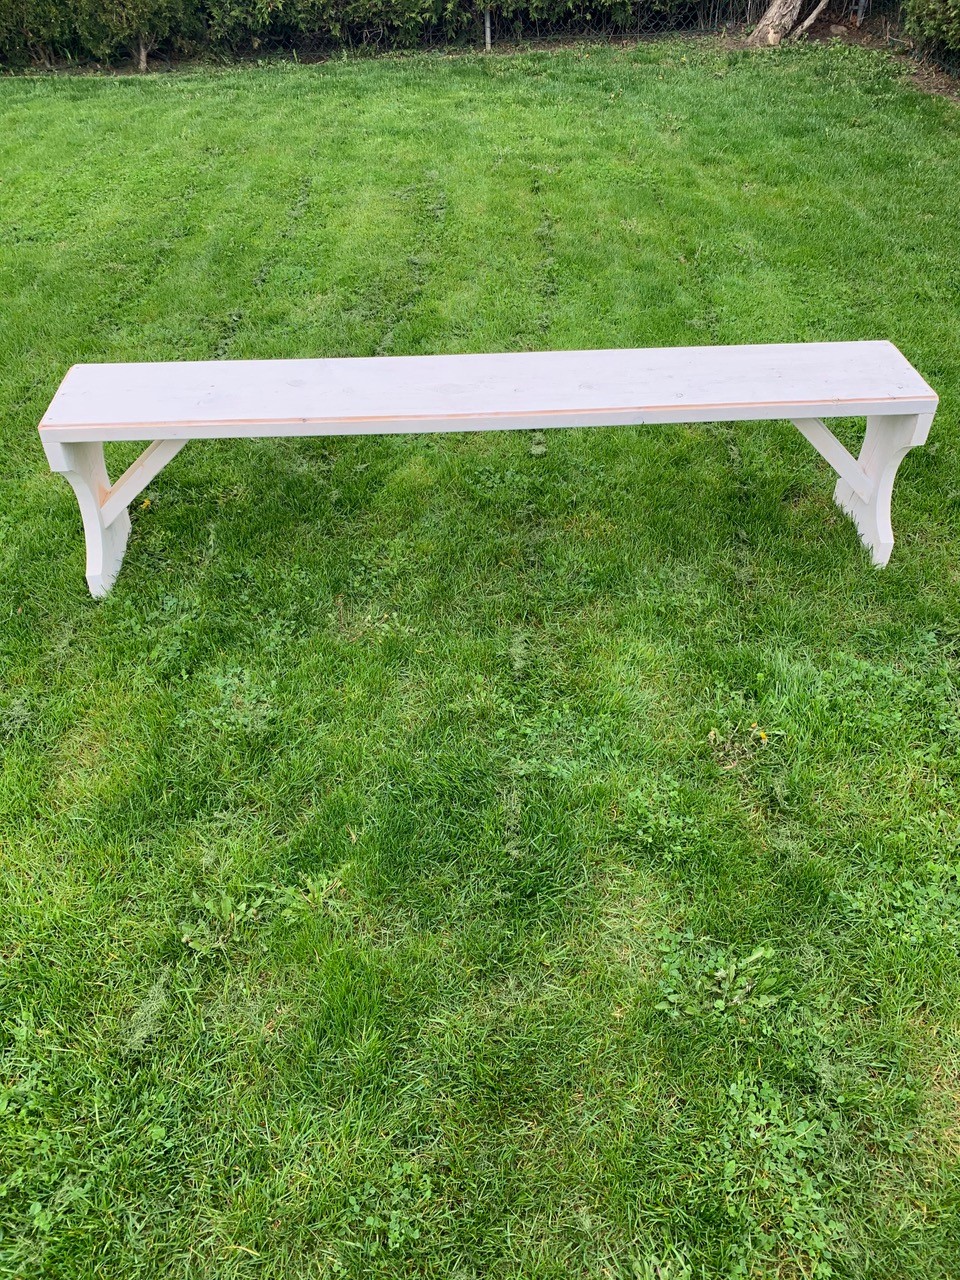 CEREMONY RUSTIC BENCH 6FT (SEATS 4 TO 5)